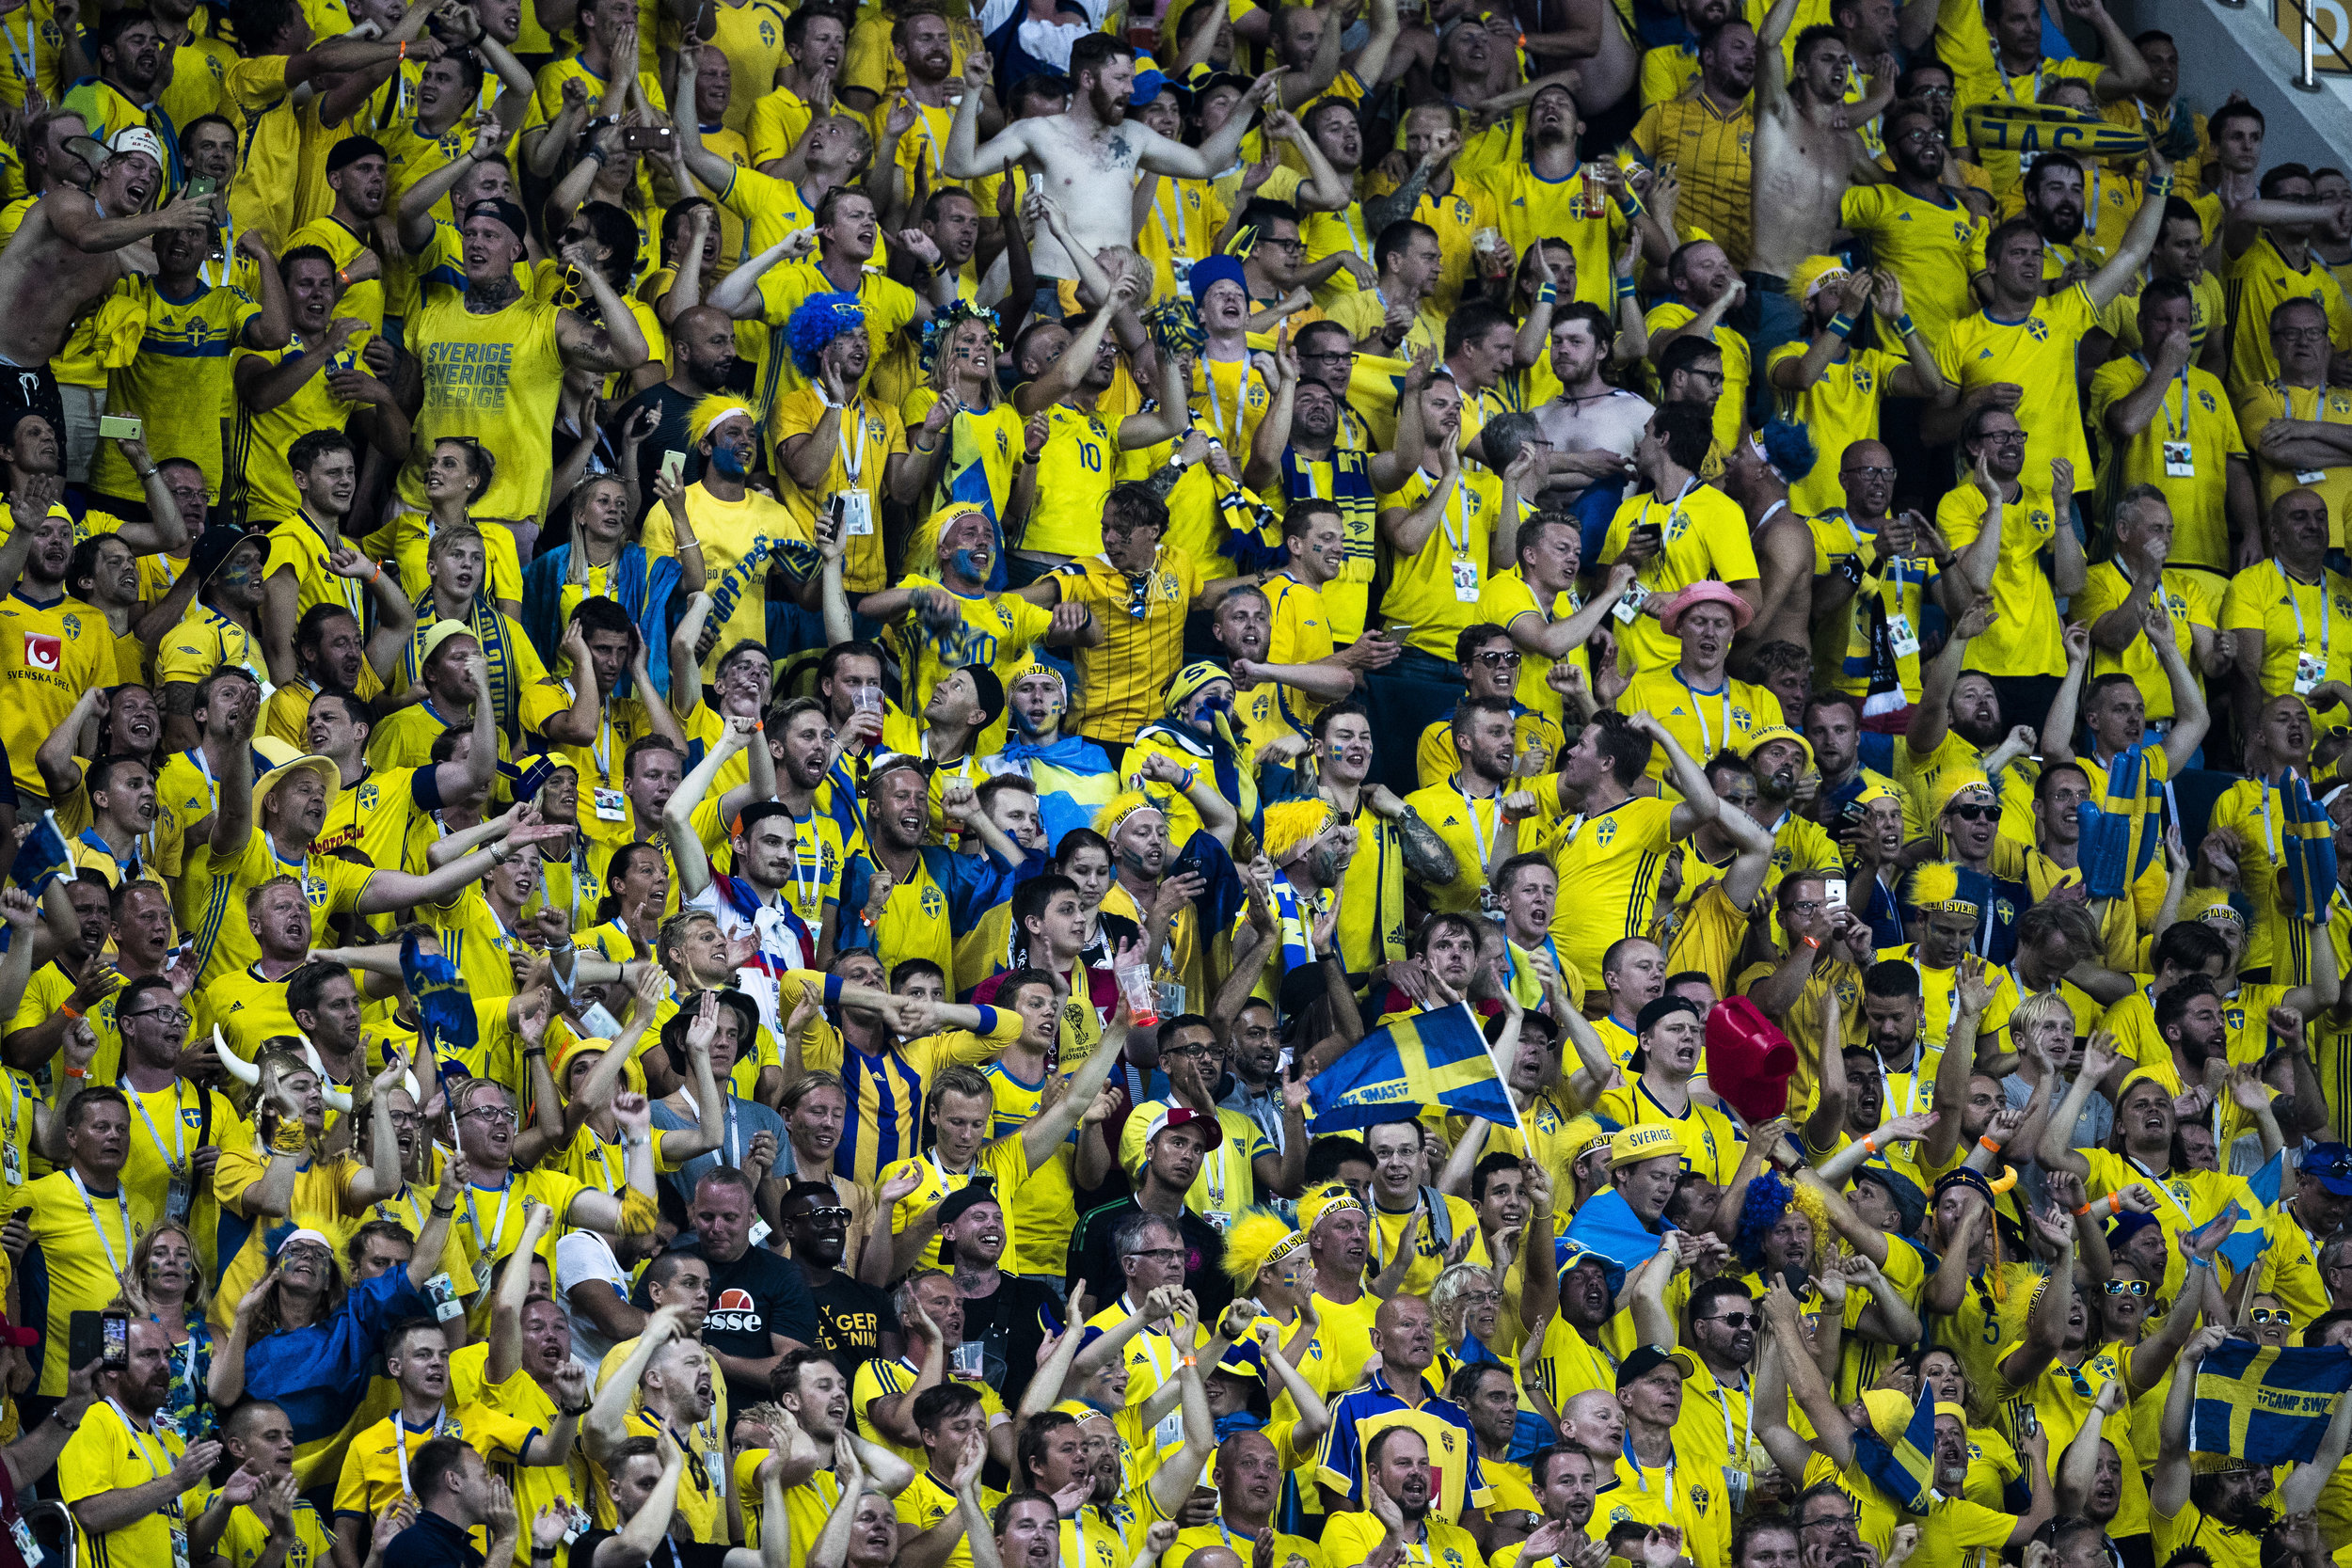  Swedish supporters celebrate their team's goal against Germany in Sochi 